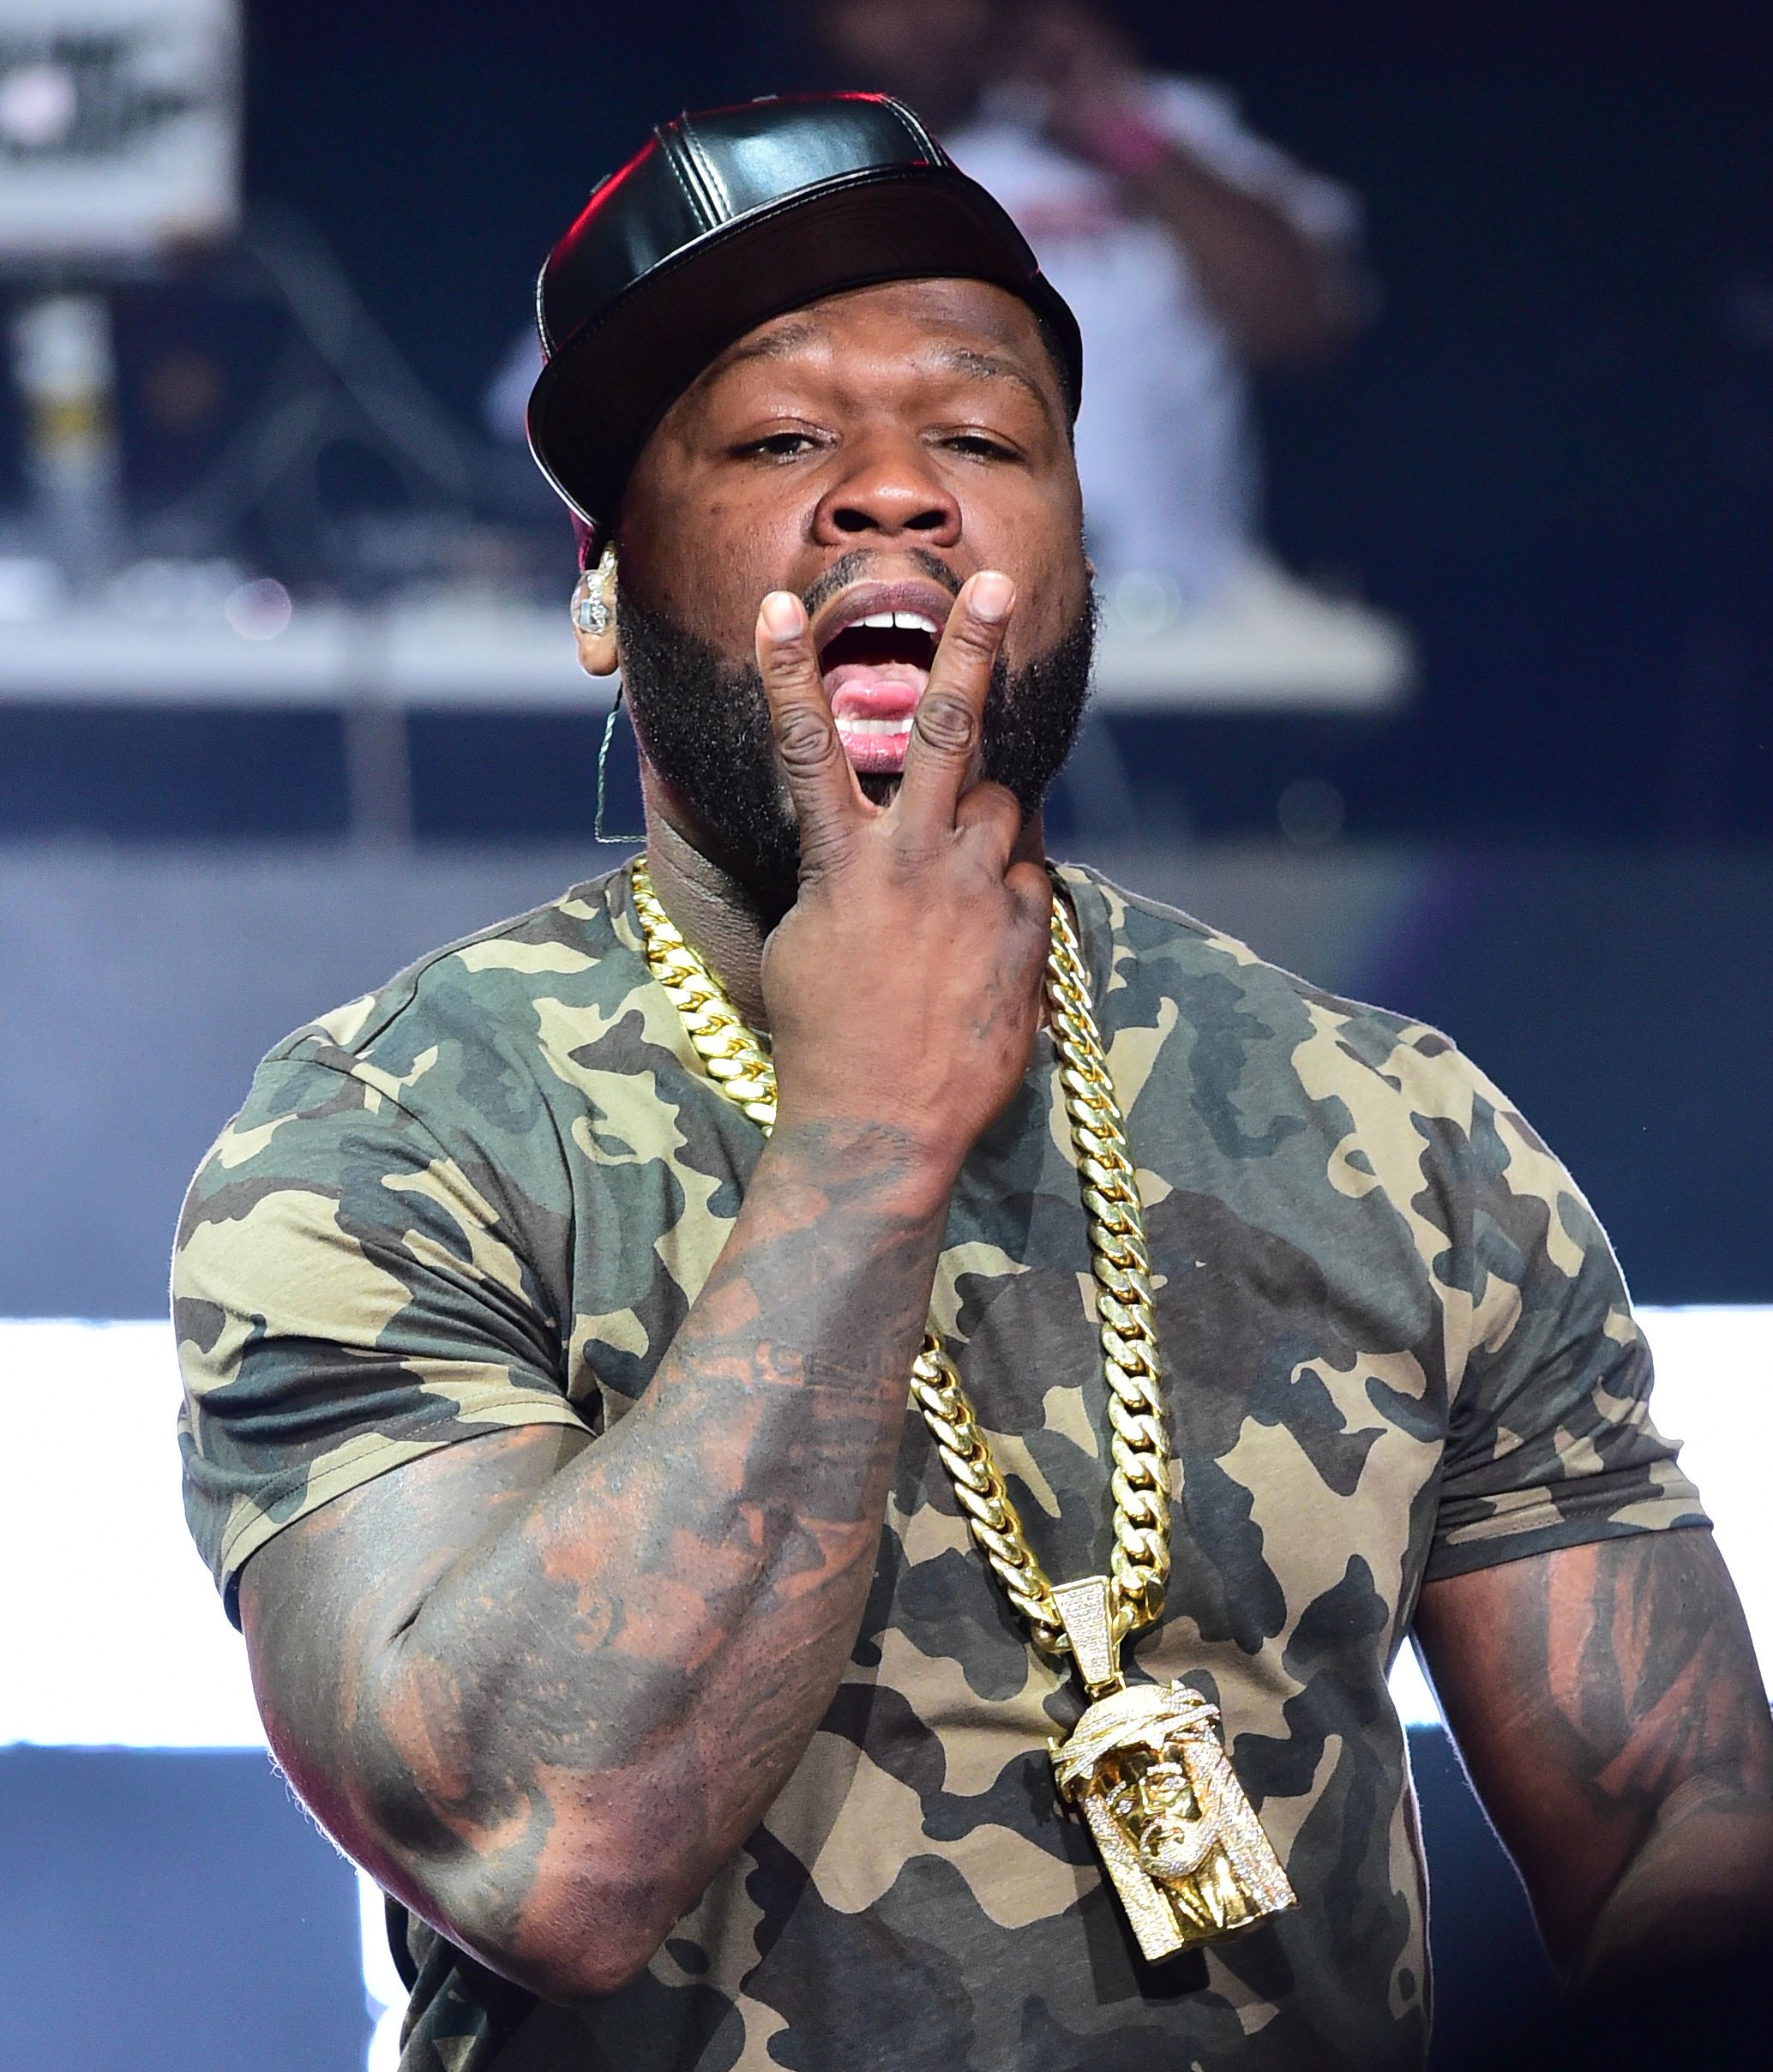 50 Cent on Becoming One of TV's Biggest Producers